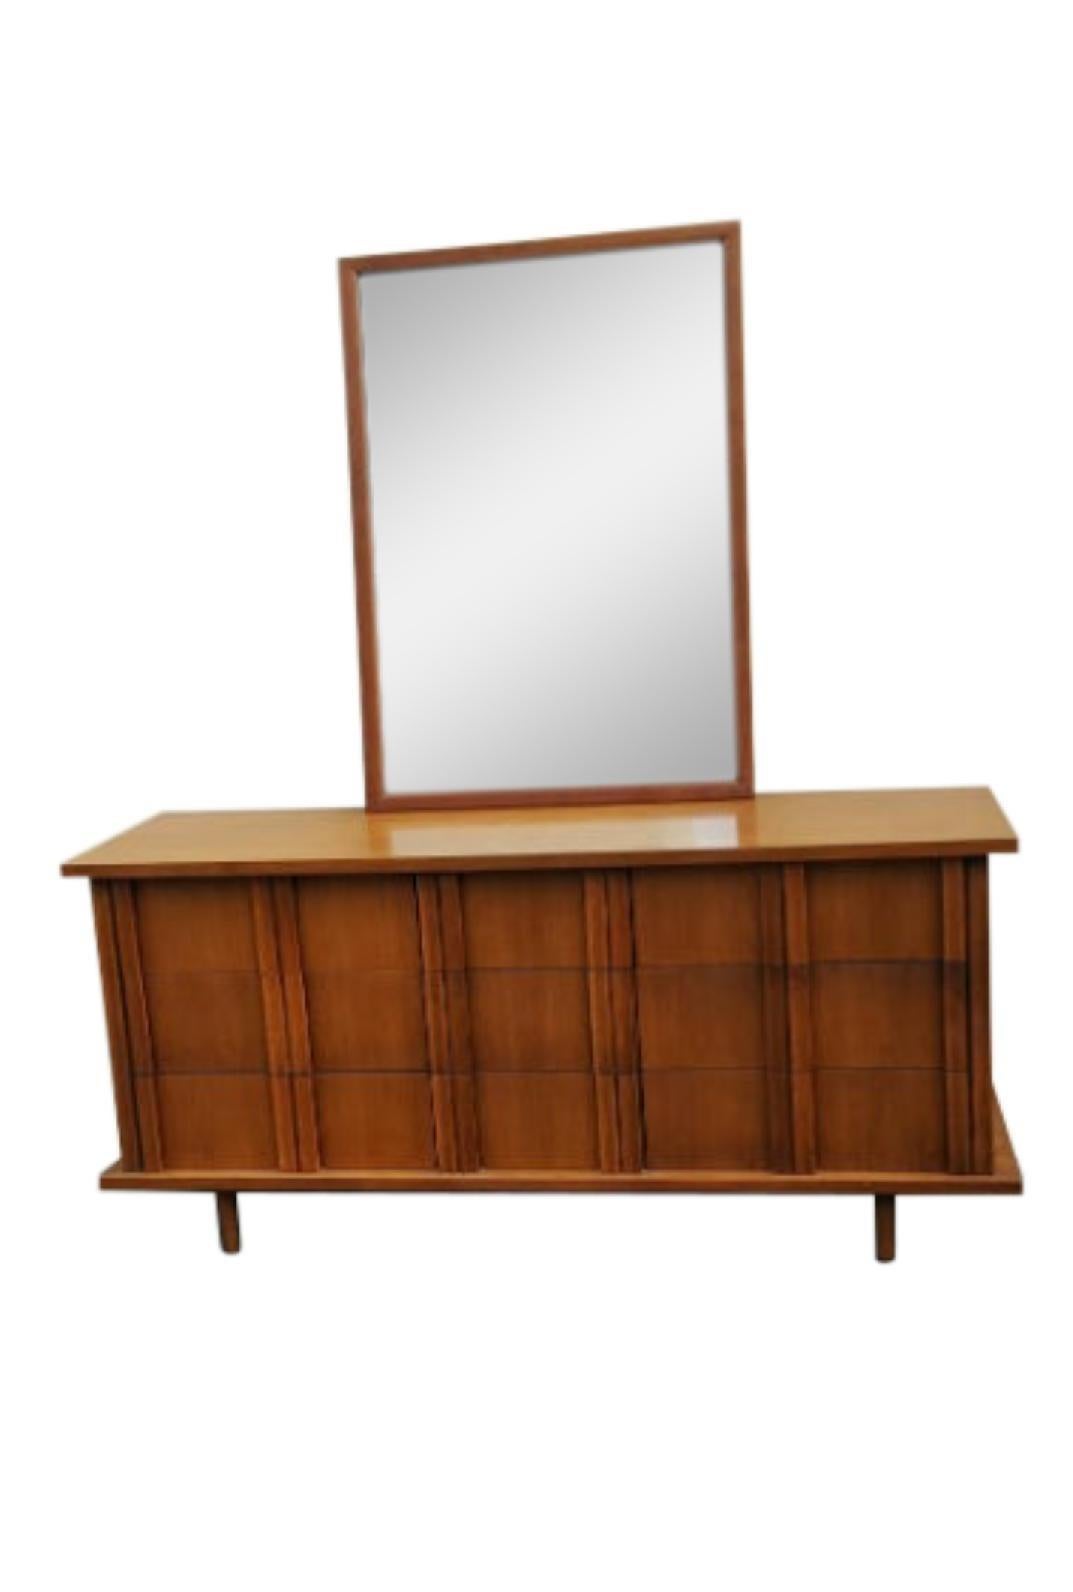 1960s American of Martinsville 9 Drawer Walnut Dresser with Matching Mirror For Sale 1